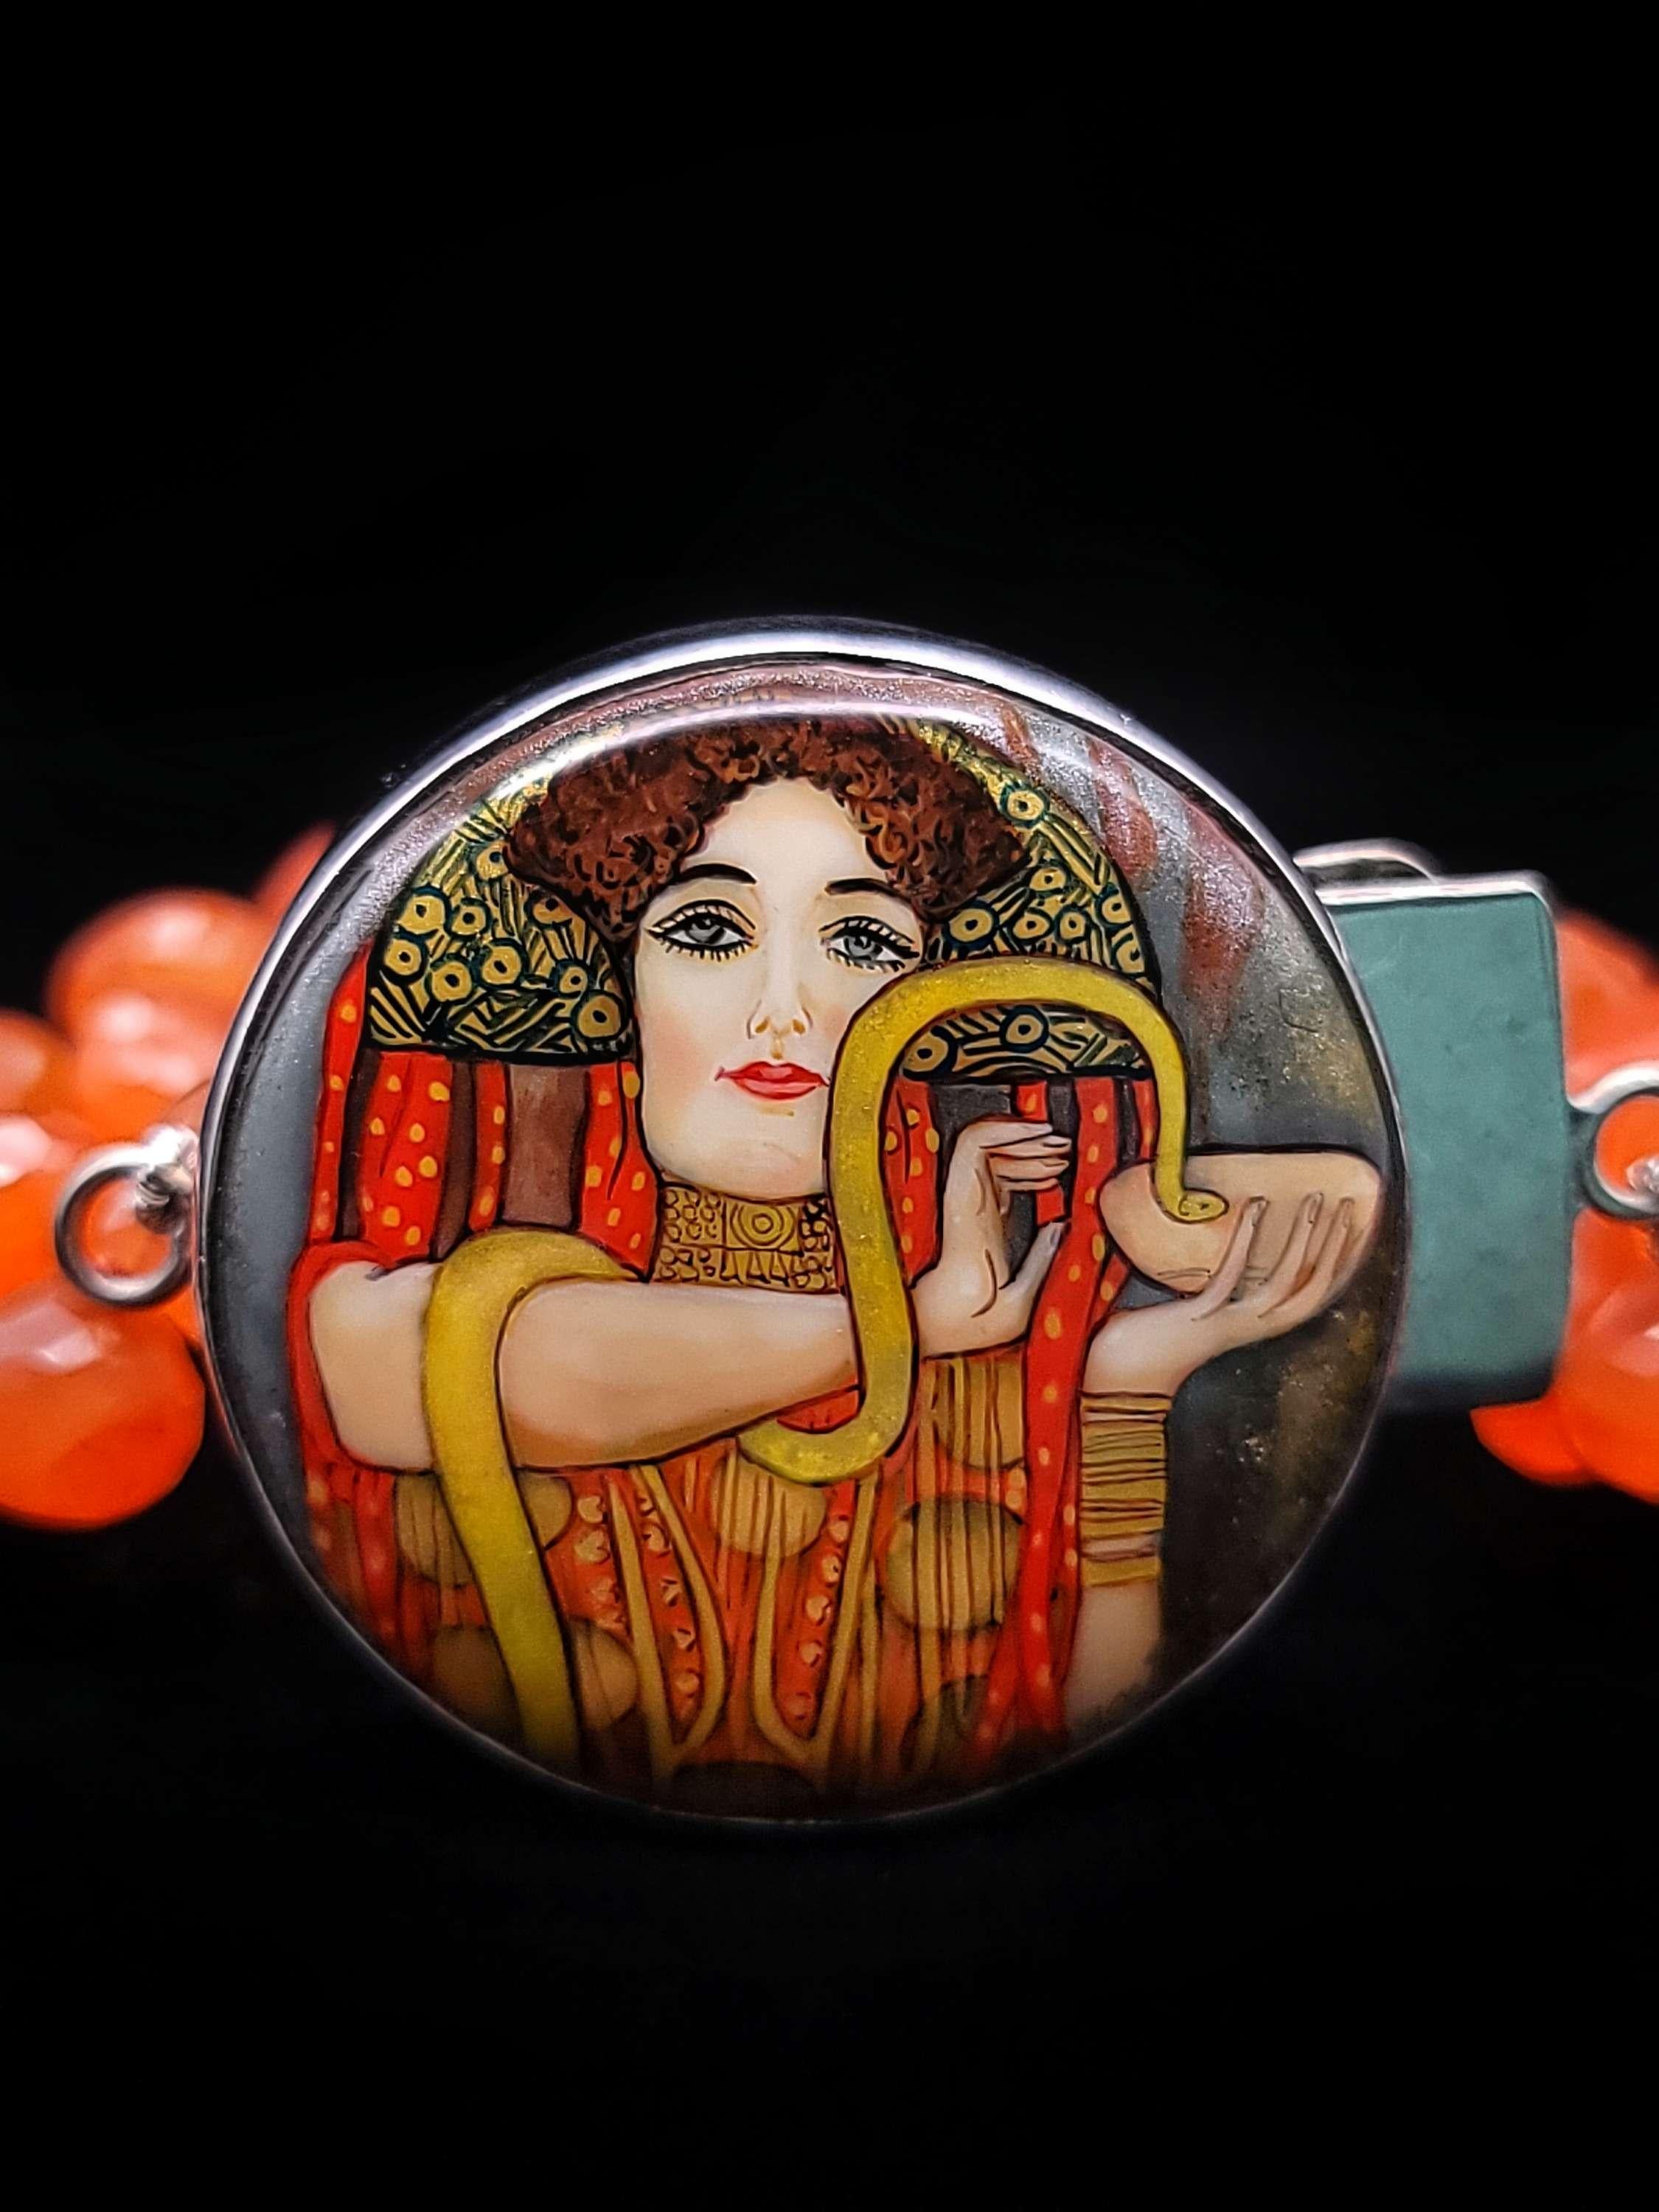 This one-of-a-kind bracelet designed by Elaine Silverstein is a stunning work of art that showcases the beauty and craftsmanship of Russian miniaturists. The centerpiece of the bracelet is a carefully reduced rendition of Gustav Klimpt's 